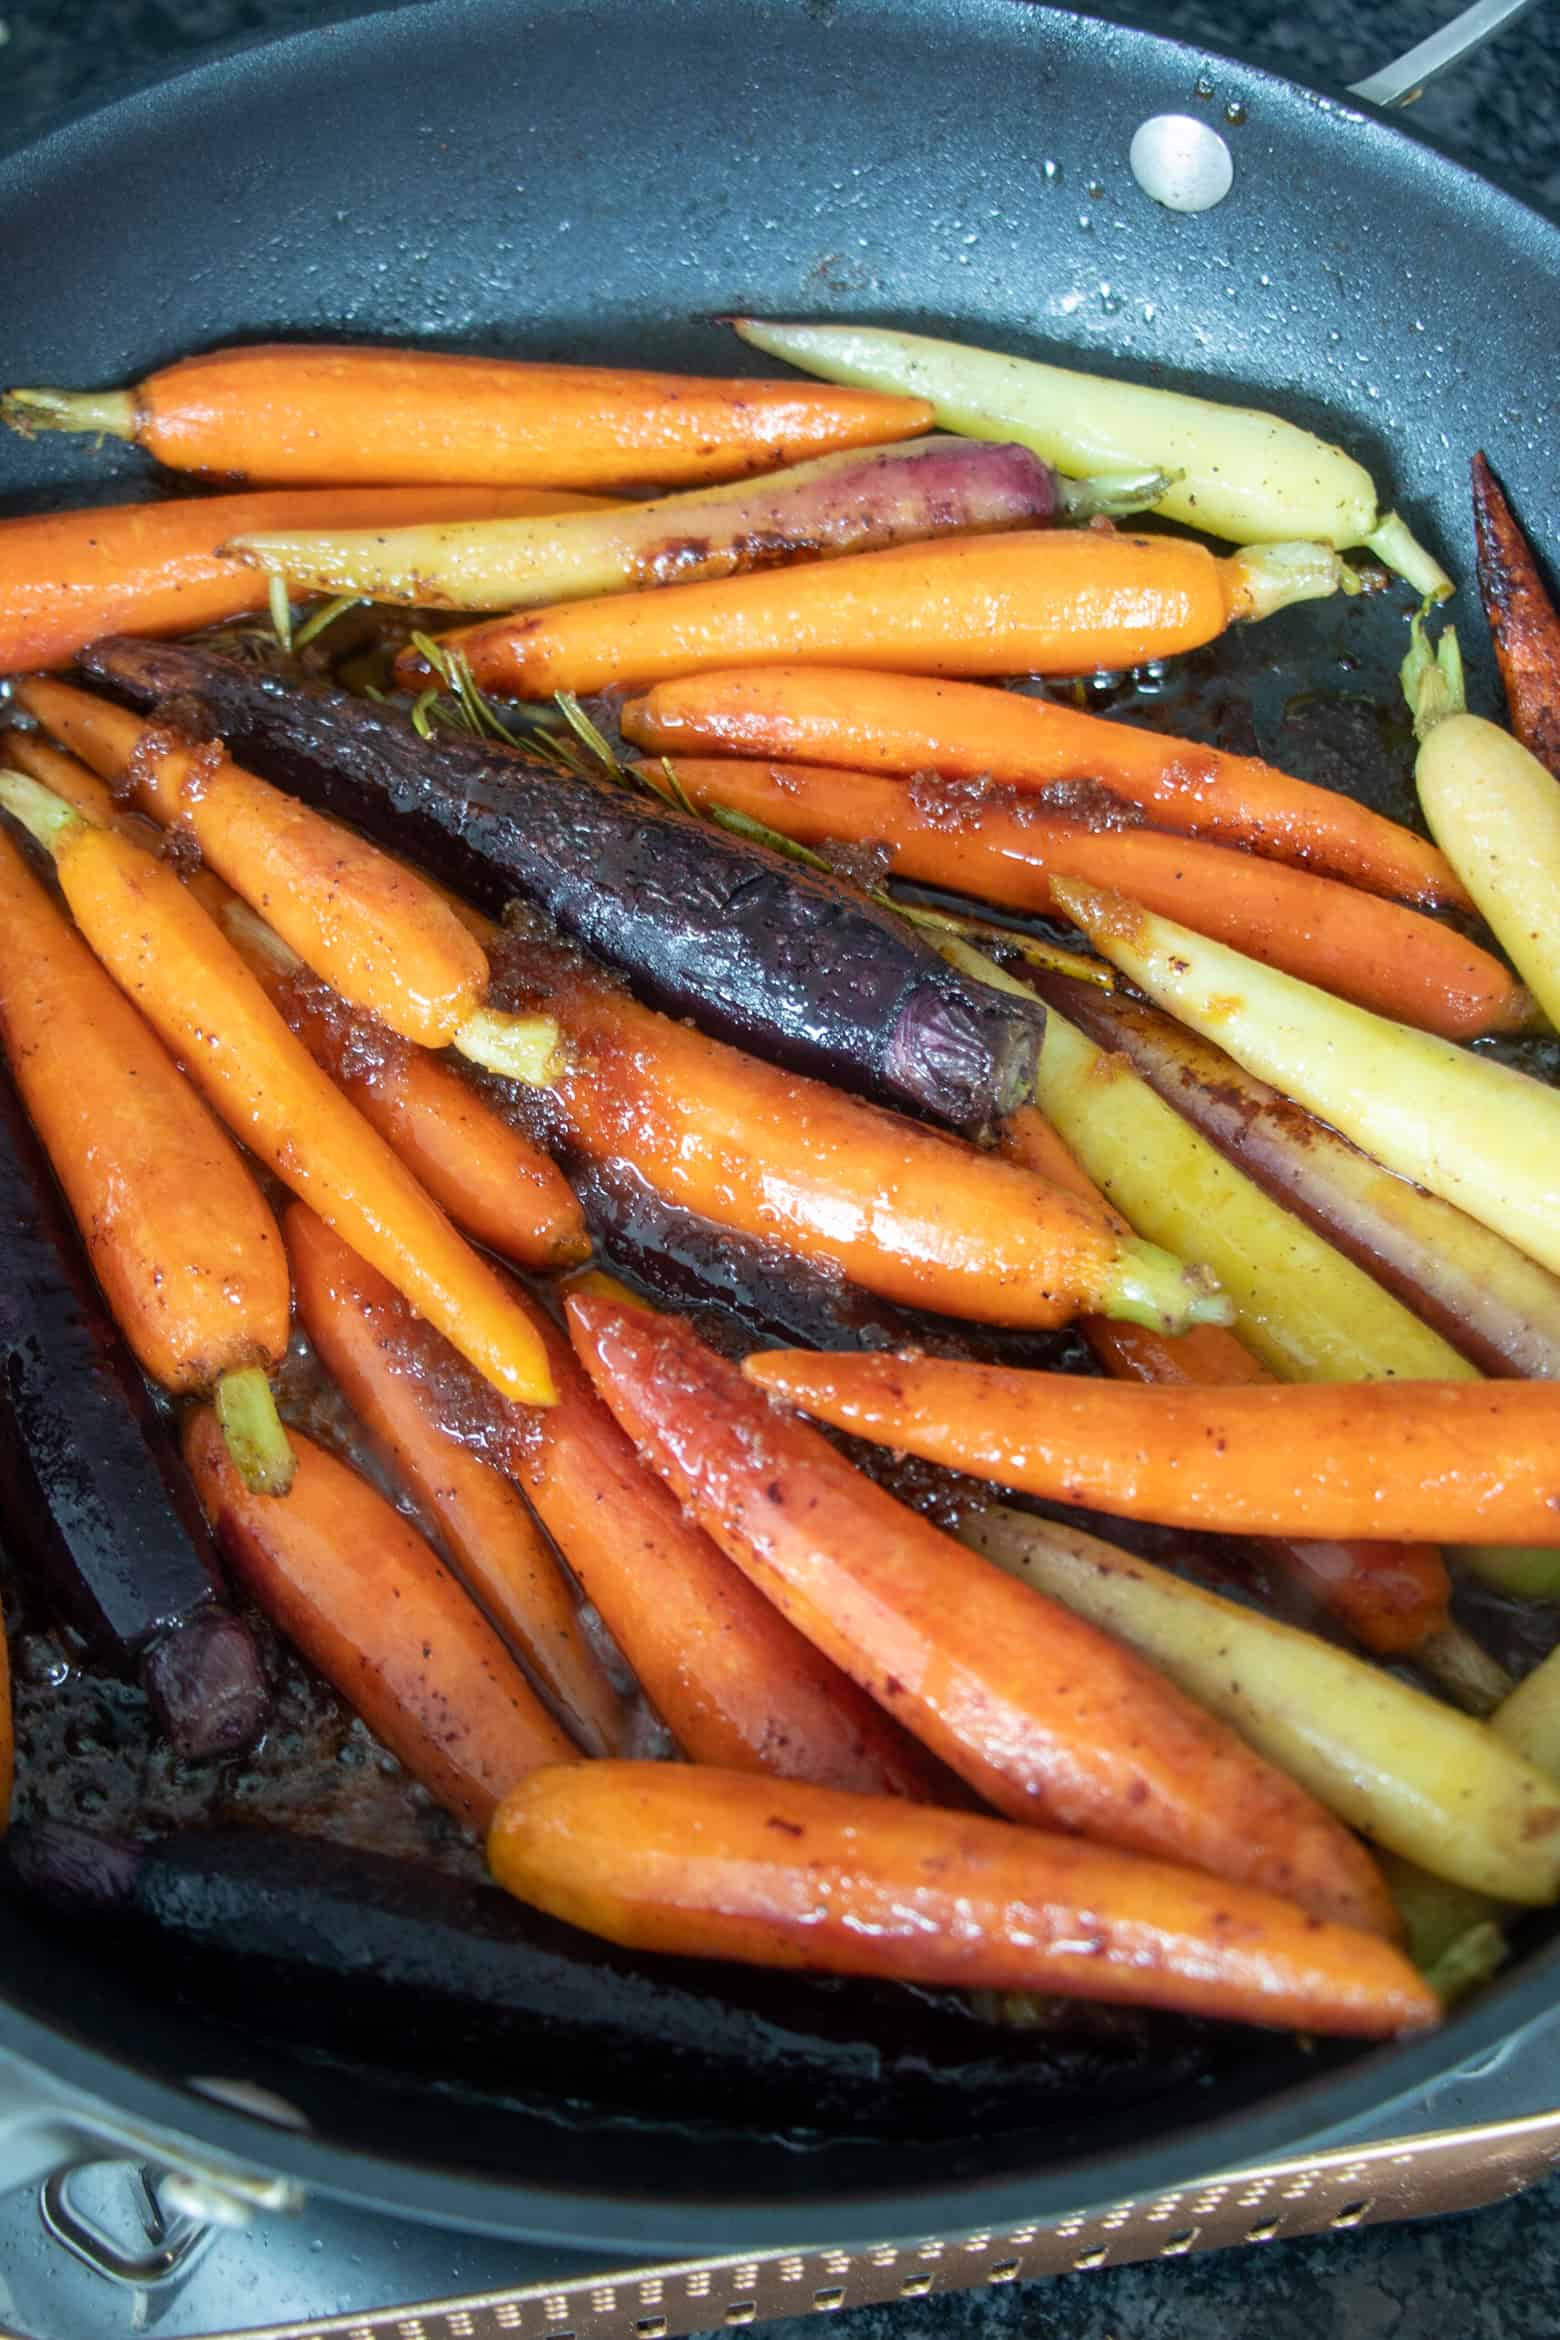 Cooked sauteed carrots.